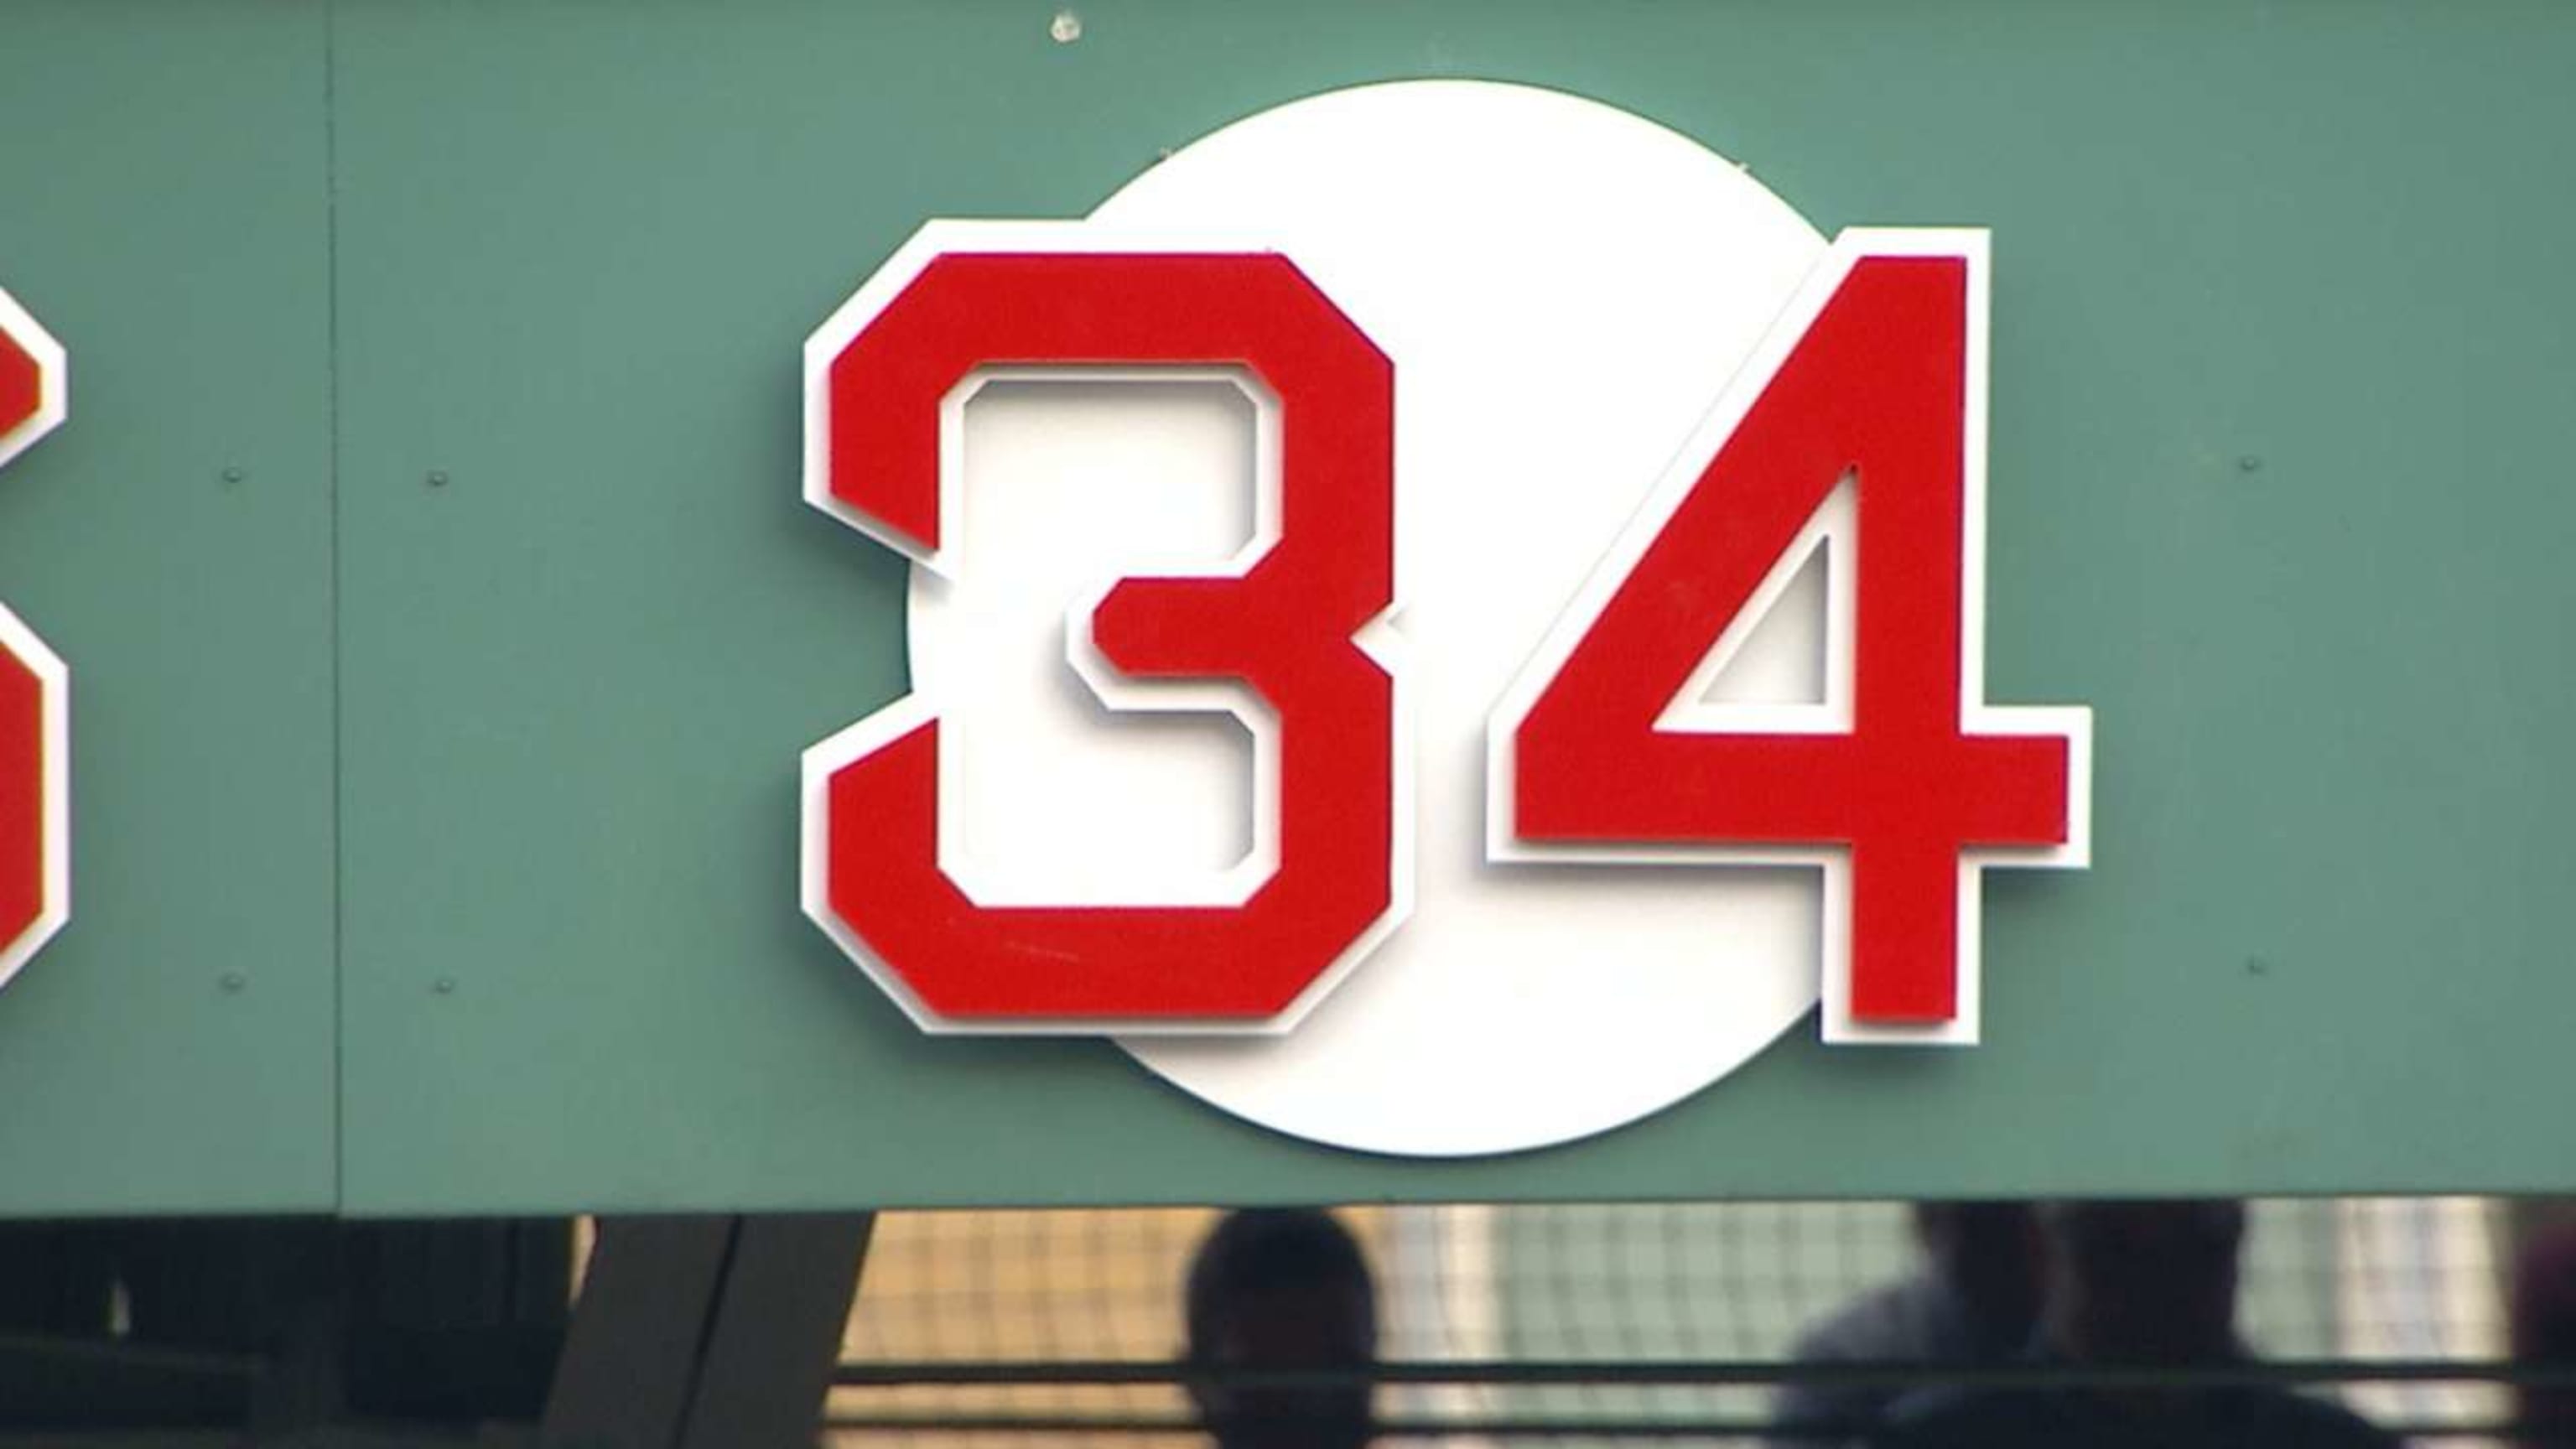 red sox retired number 45